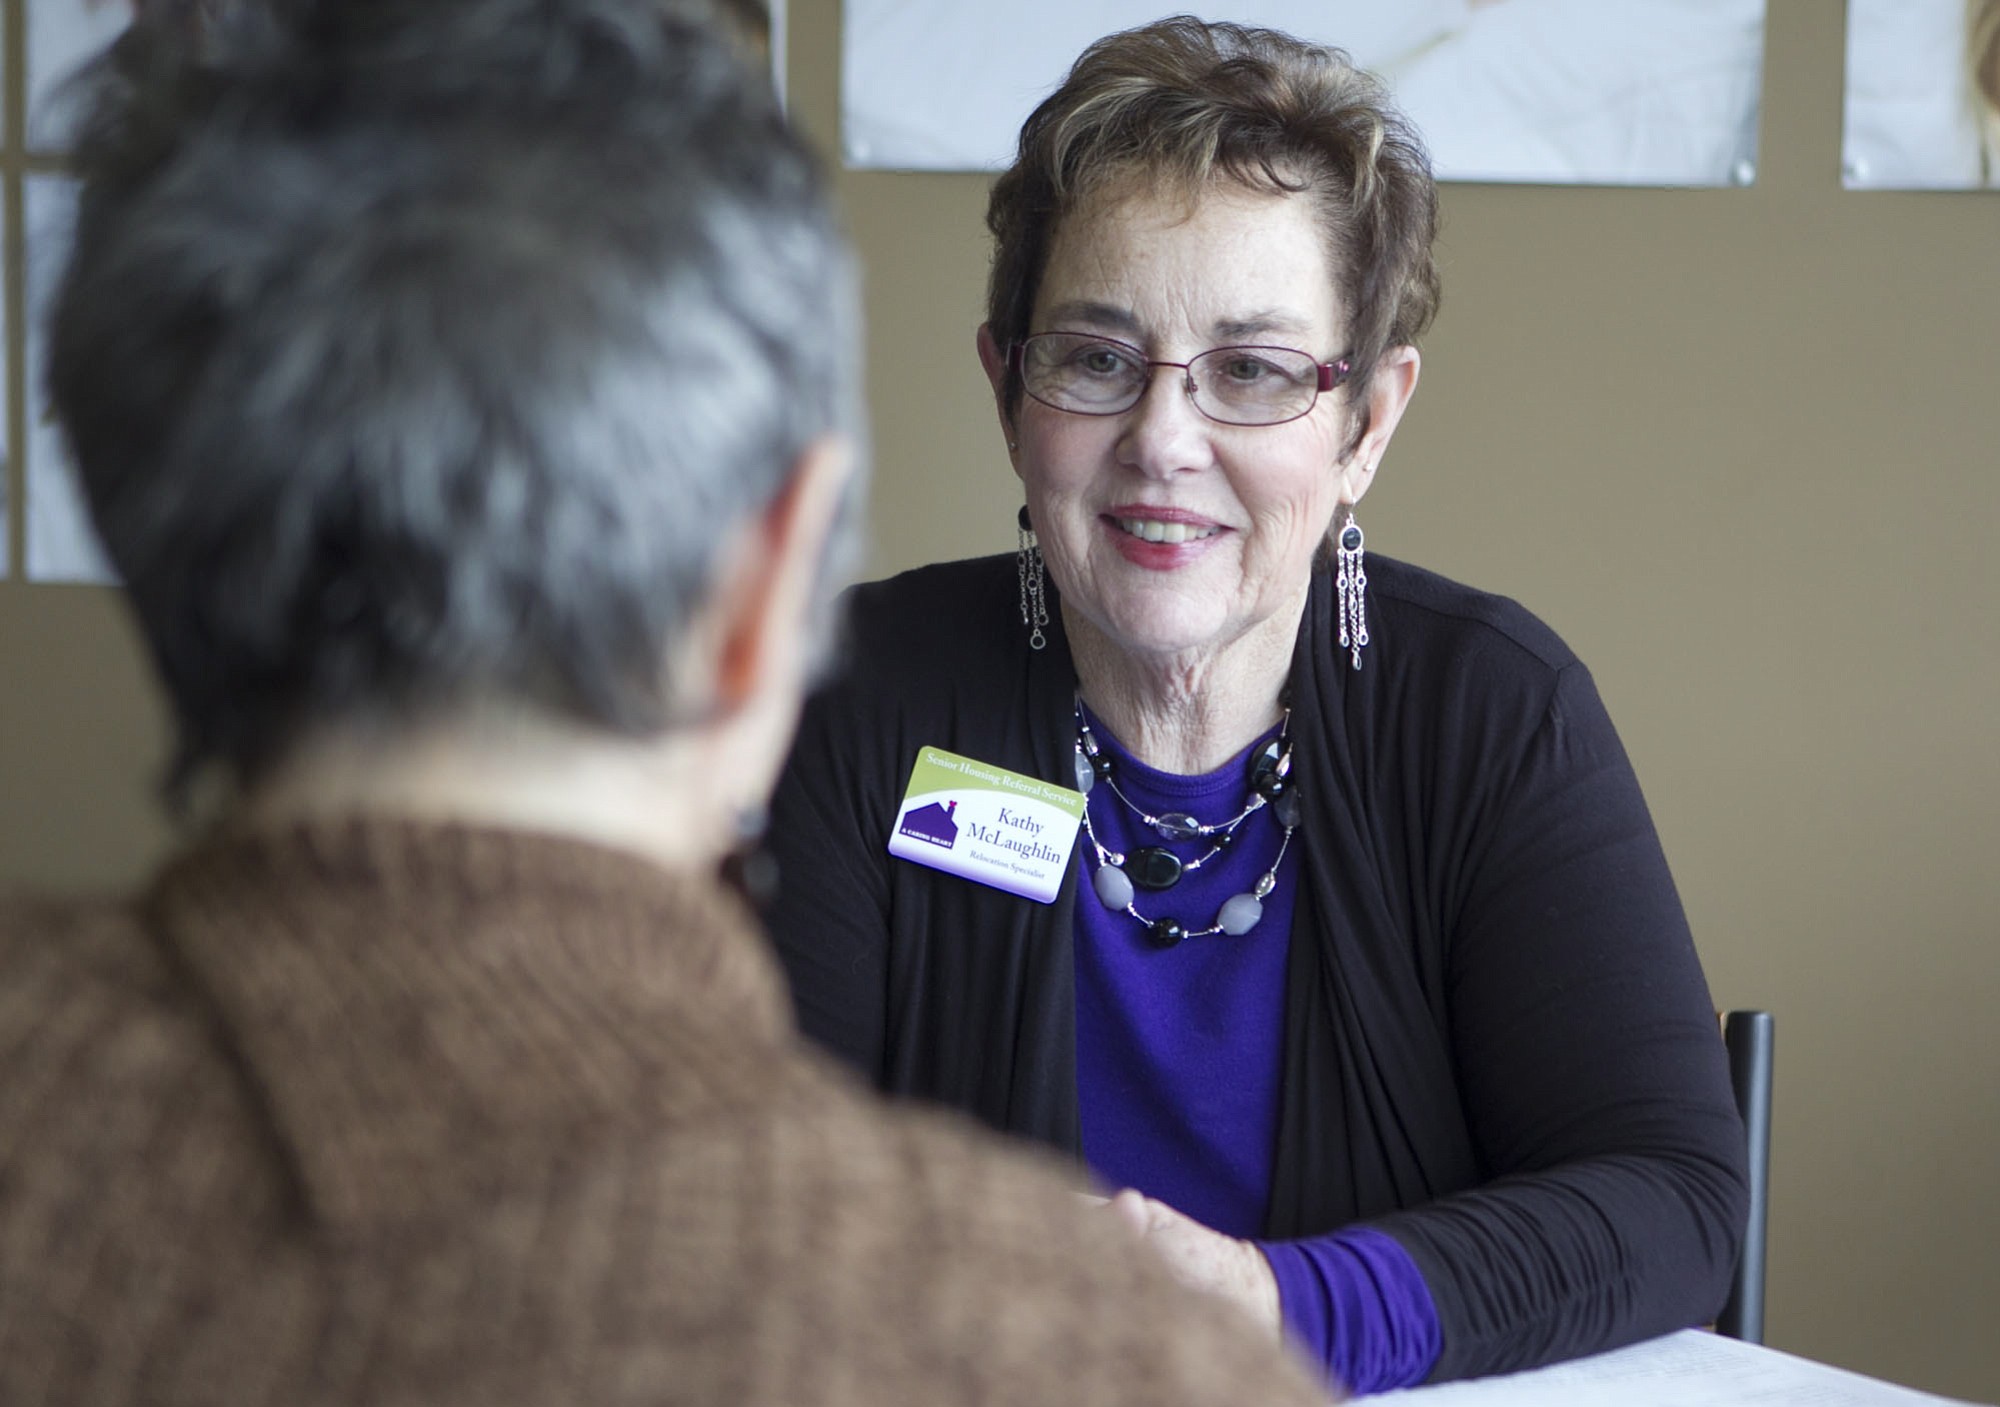 Kathy McLaughlin meets with a client at A Caring Heart Housing Referral Service on Tuesday in Vancouver.